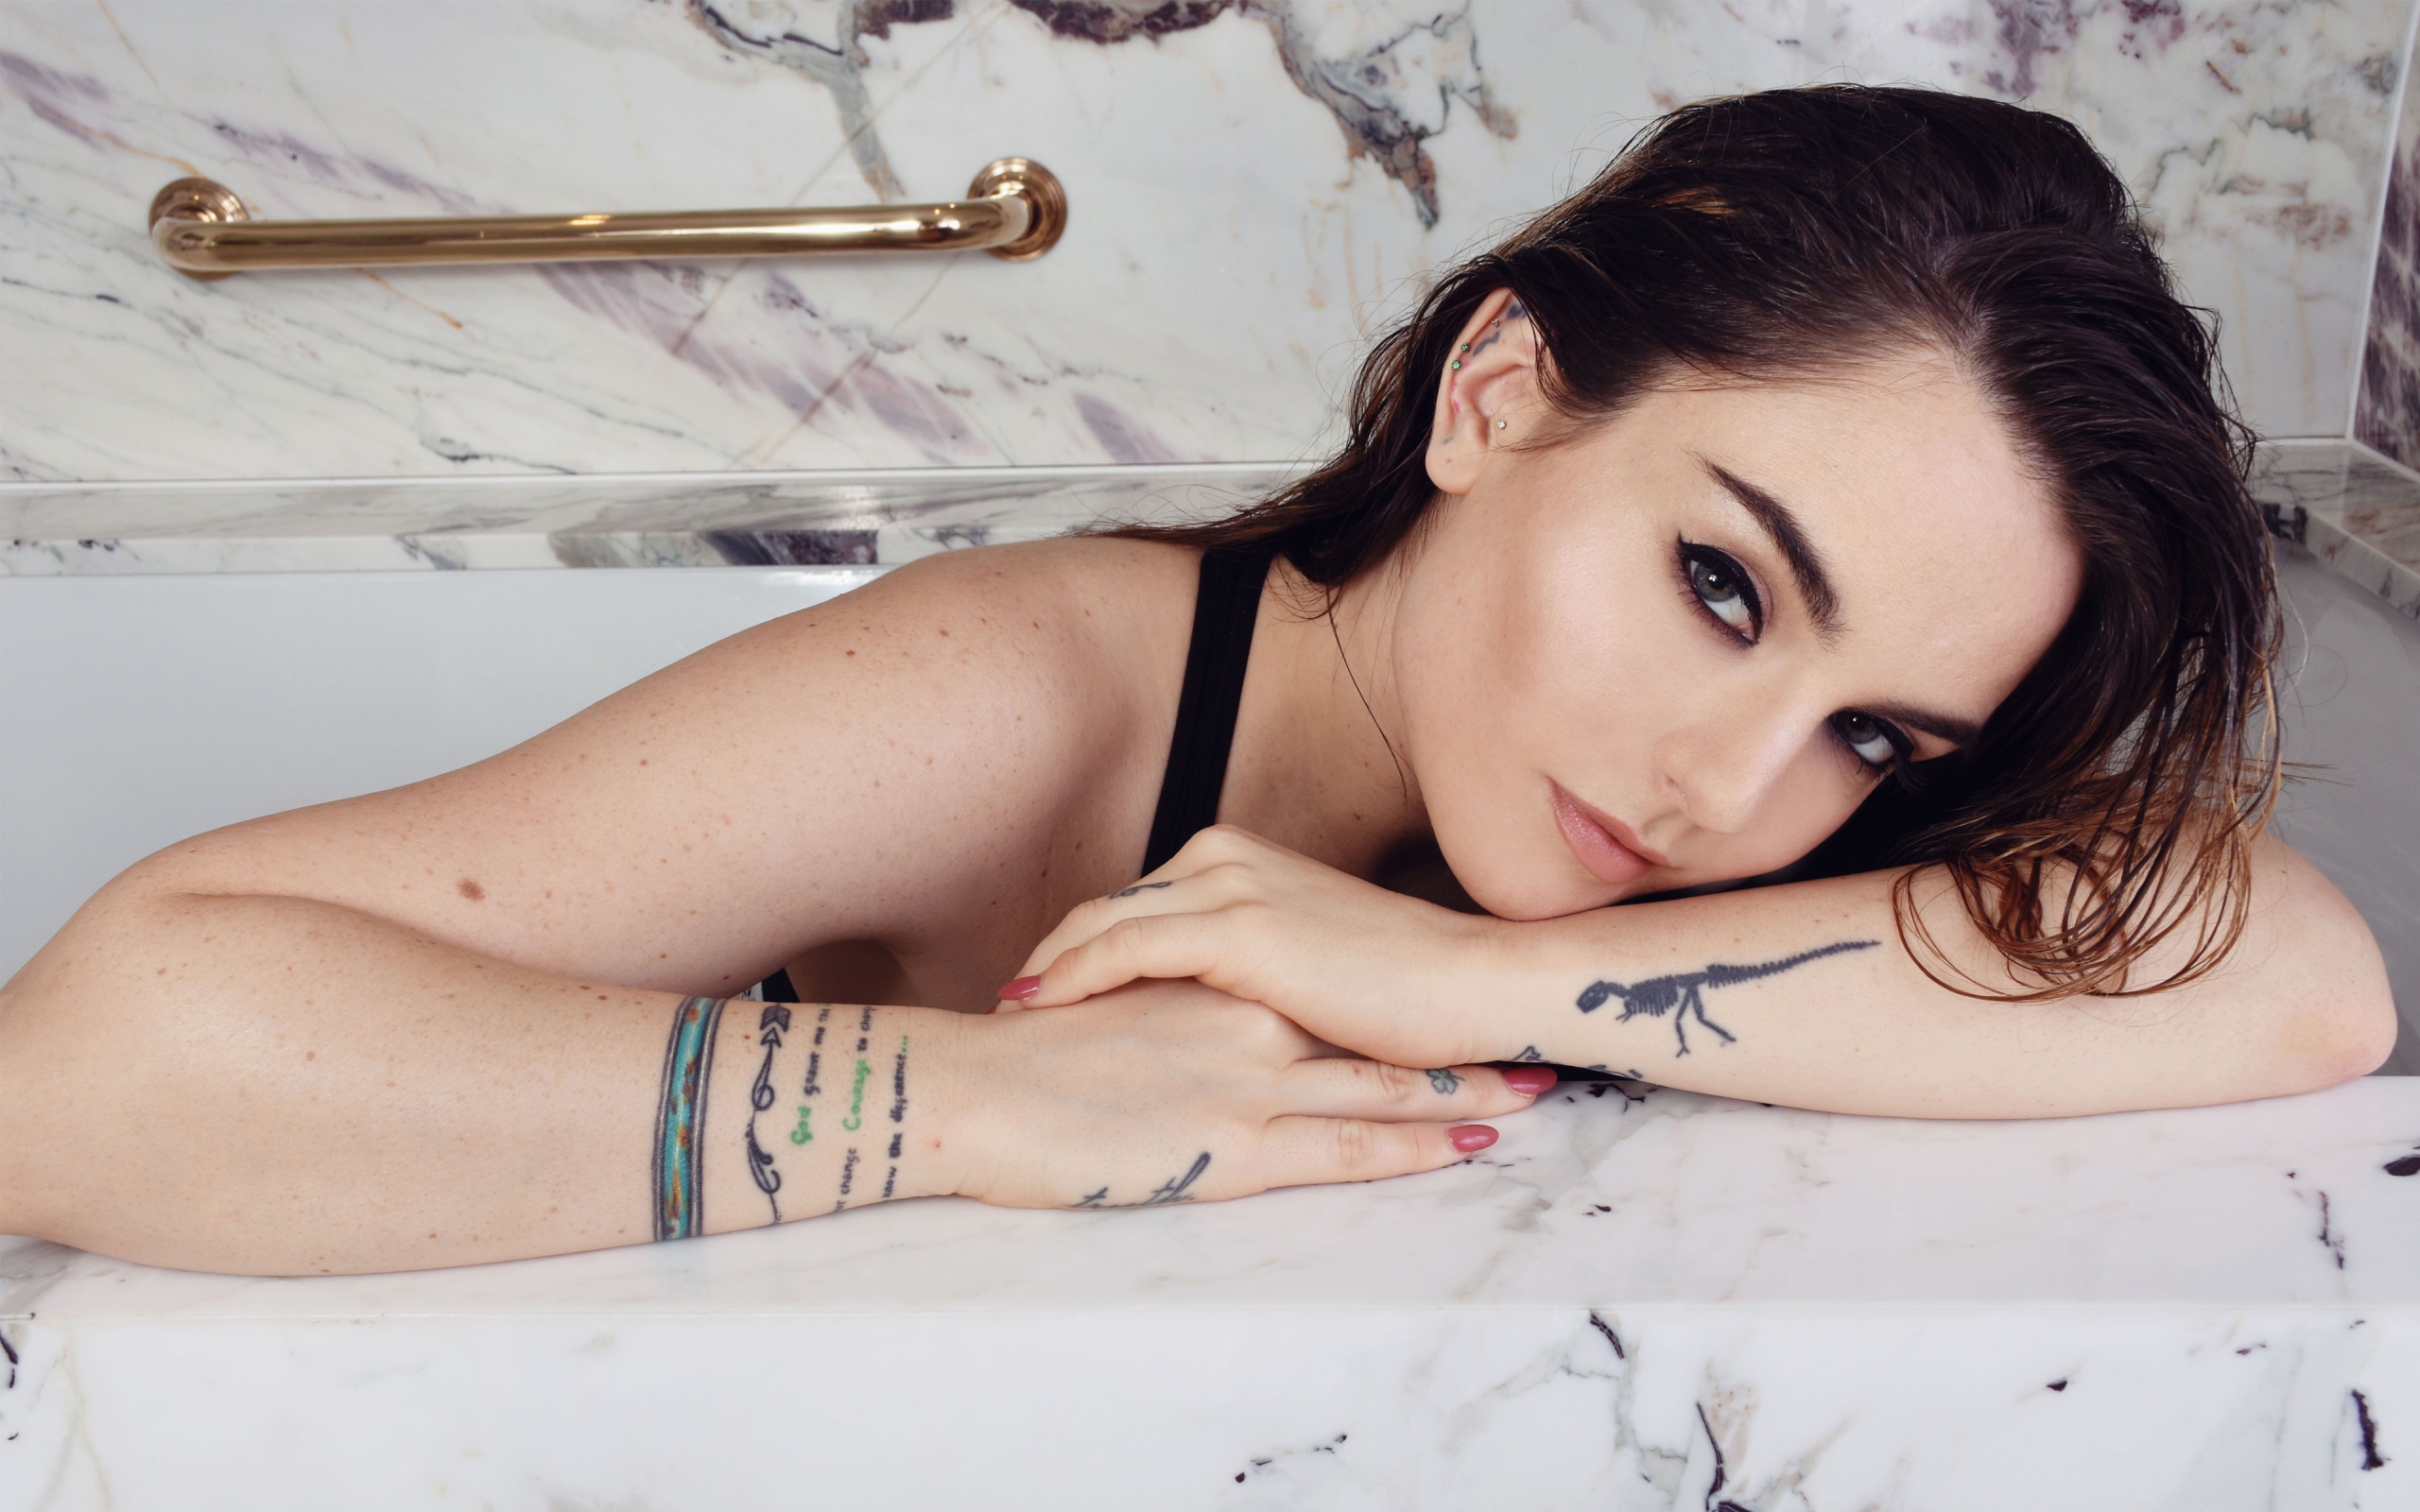 American singer Jojo with tattoos in her arms